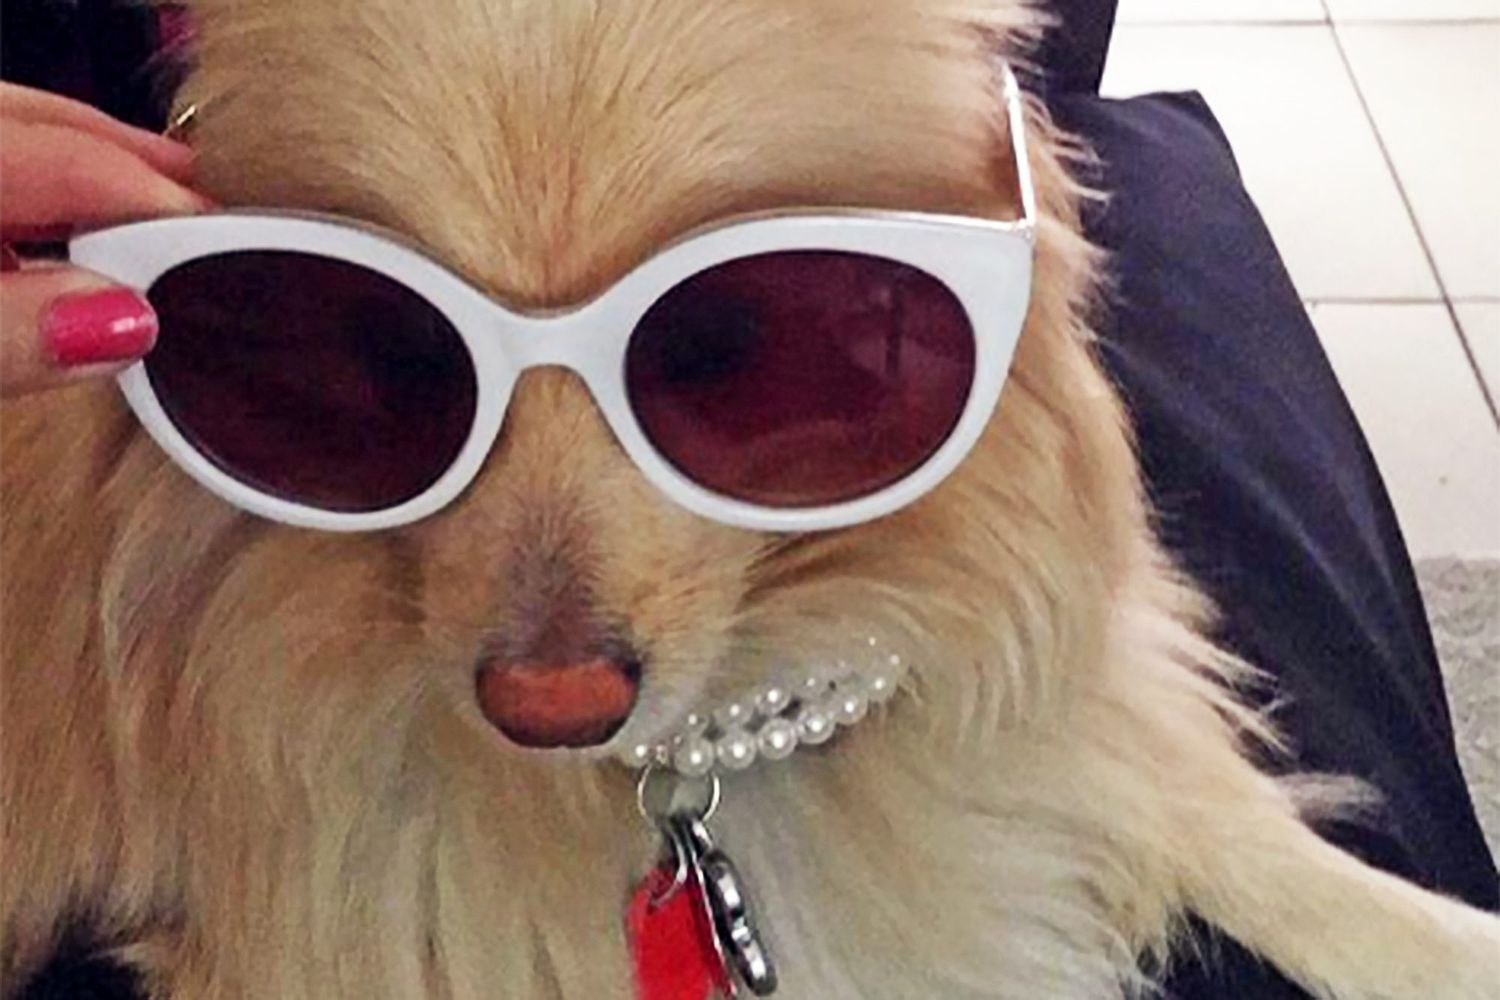 Sammy the Pomeranian posing in pearls and sunglasses for Instagram